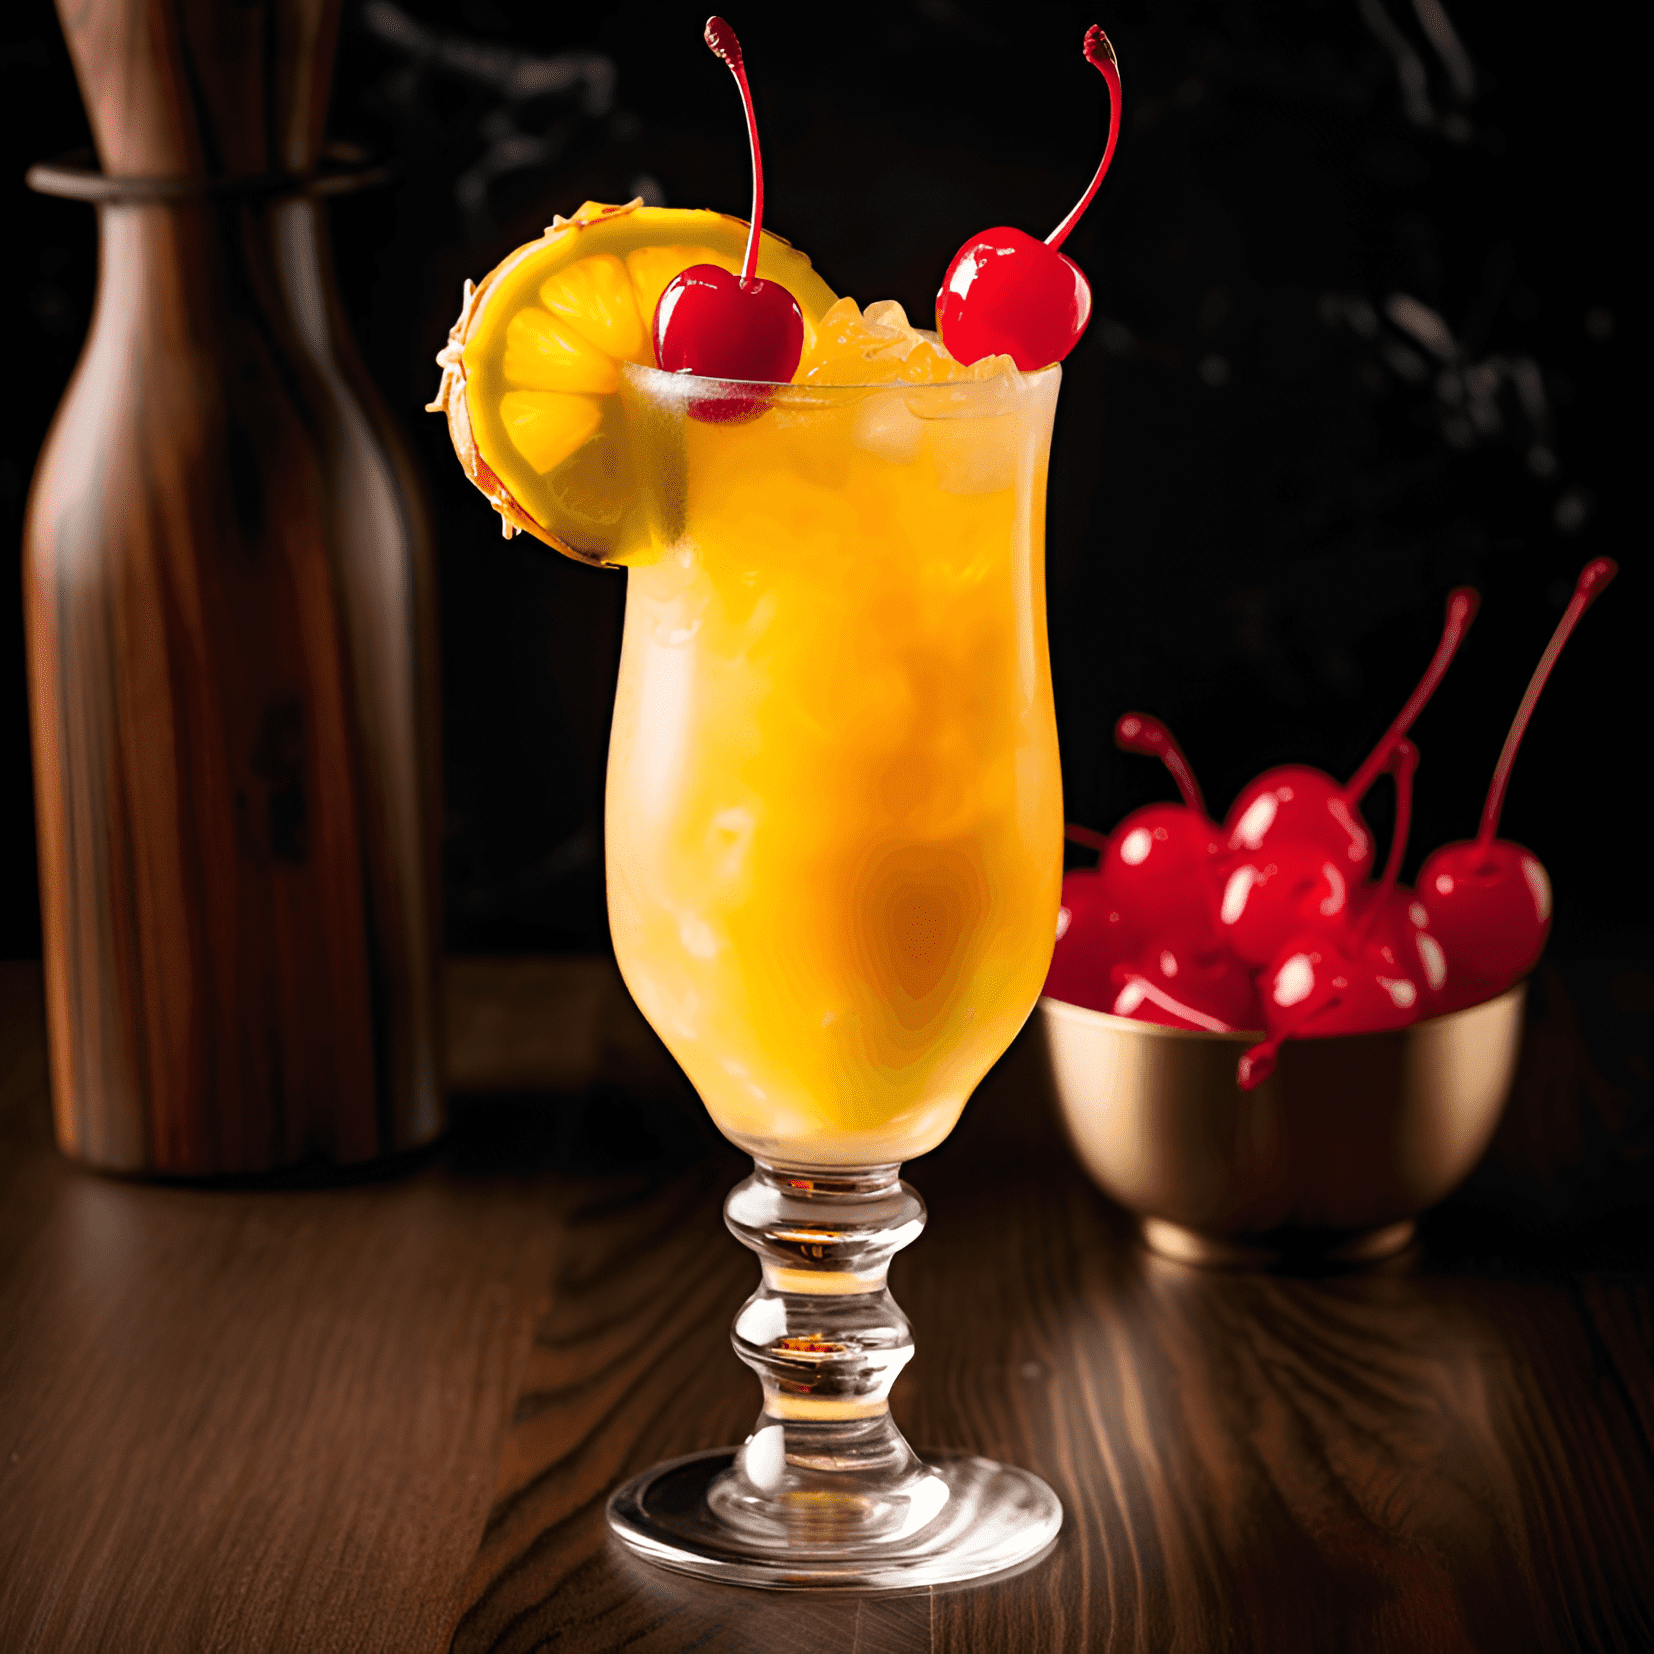 Fandango Cocktail Recipe - The Fandango cocktail is a harmonious blend of sweet, sour, and fruity flavors. It has a refreshing and tangy taste with a hint of sweetness, making it a perfect drink for a hot summer day. The combination of citrus and pineapple gives it a tropical flair, while the rum adds a smooth and warming finish.